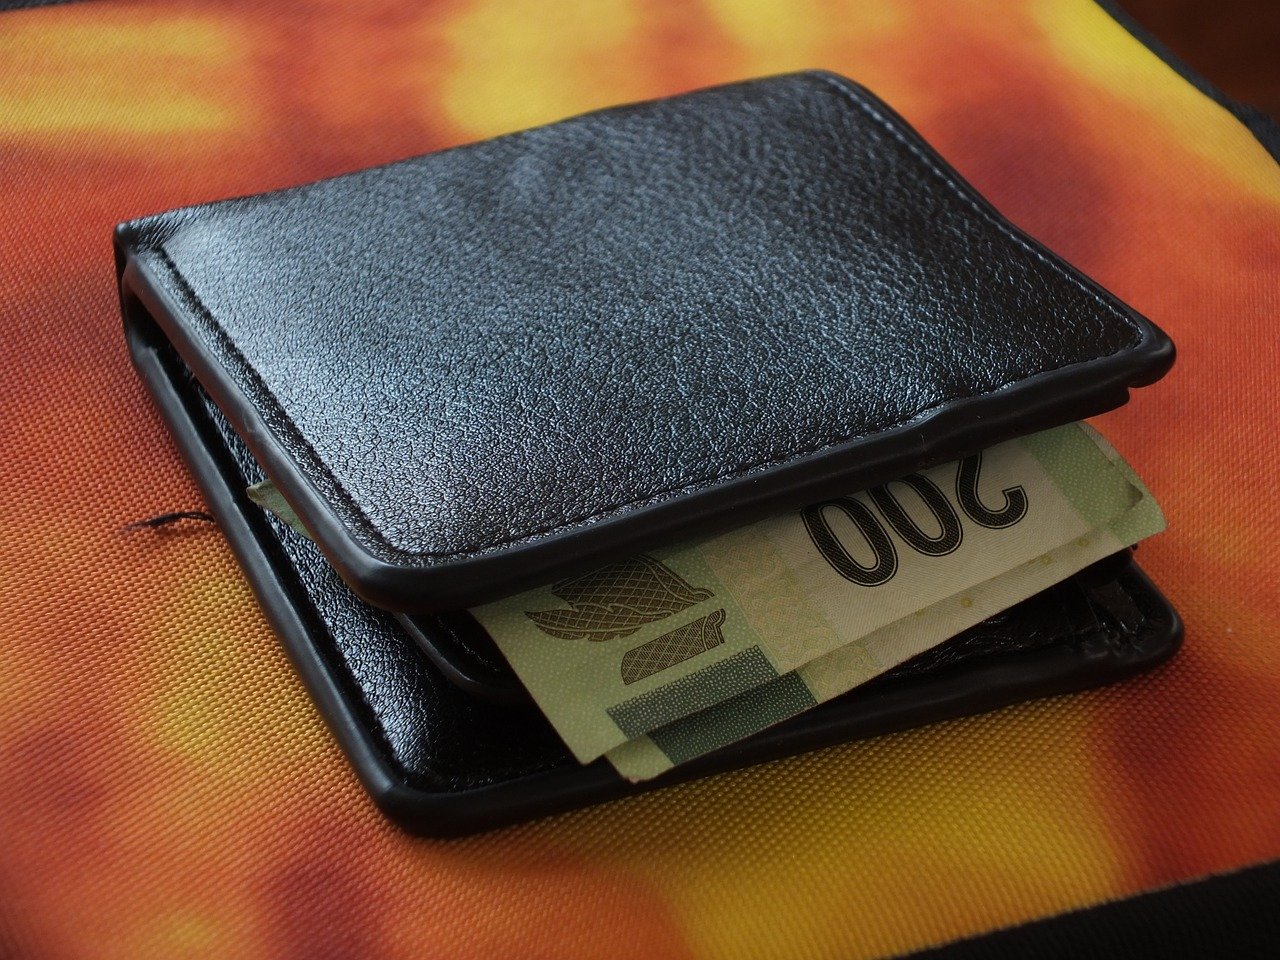 Factors to Consider When Assessing the Resale Price of Leather Wallets